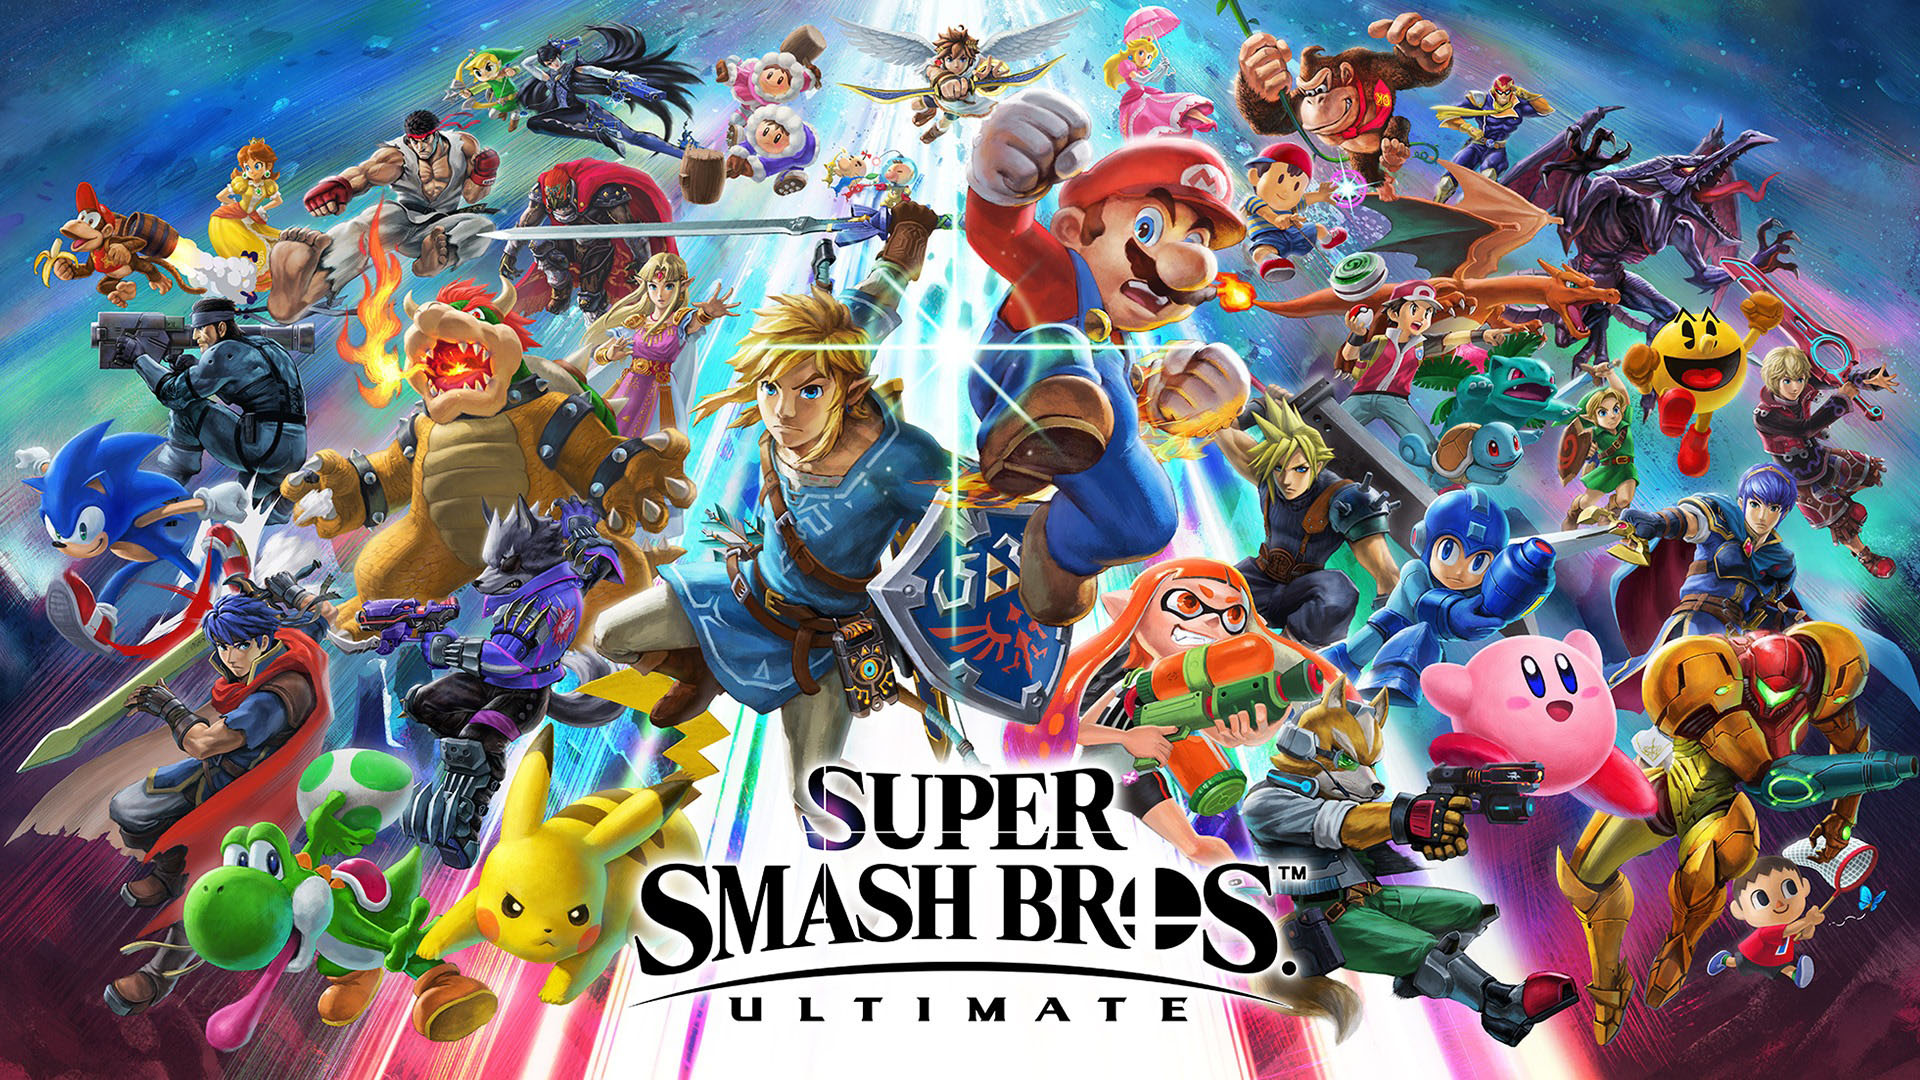 Super Smash Bros. is a Japanese series of crossover fighting video games published by Nintendo, and primarily features characters from various Nintend...